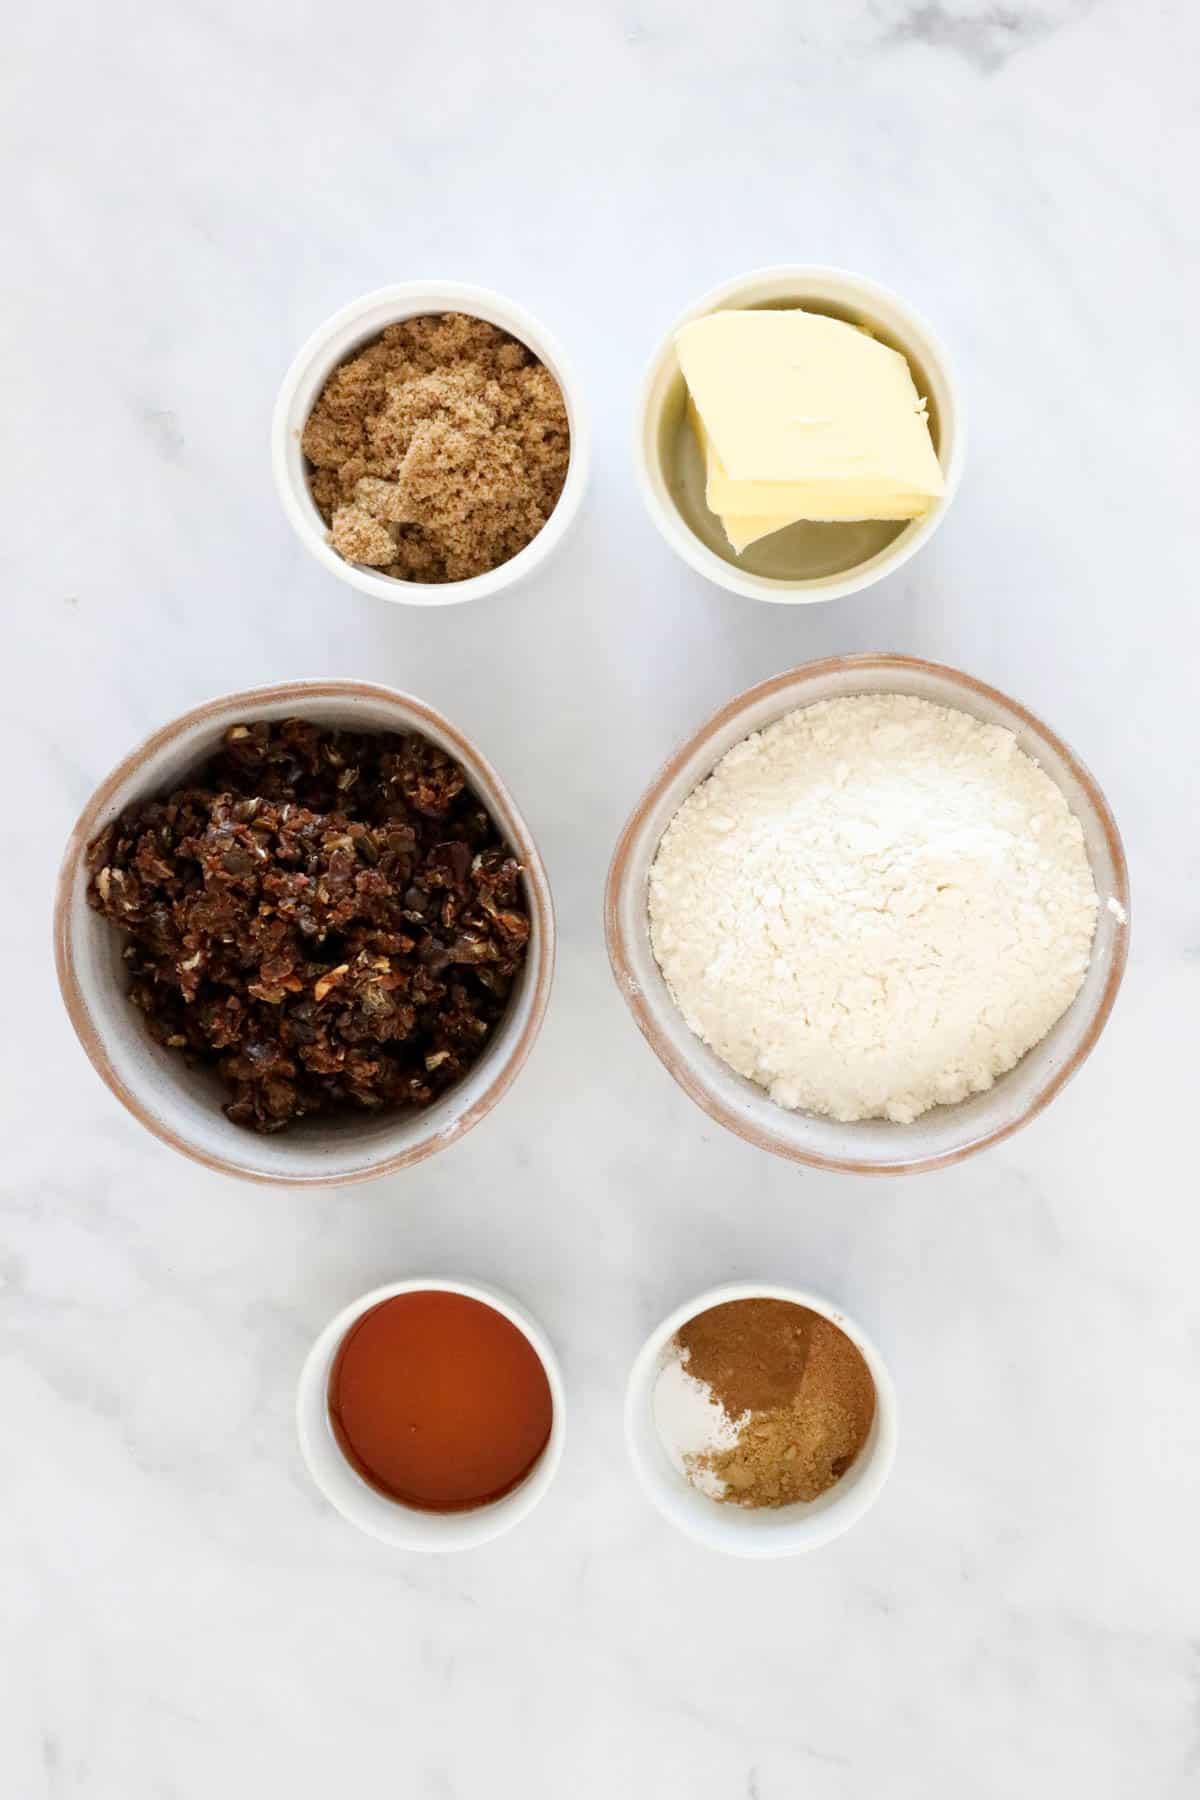 Ingredients needed to make the cookies weighed and placed in individual bowls.